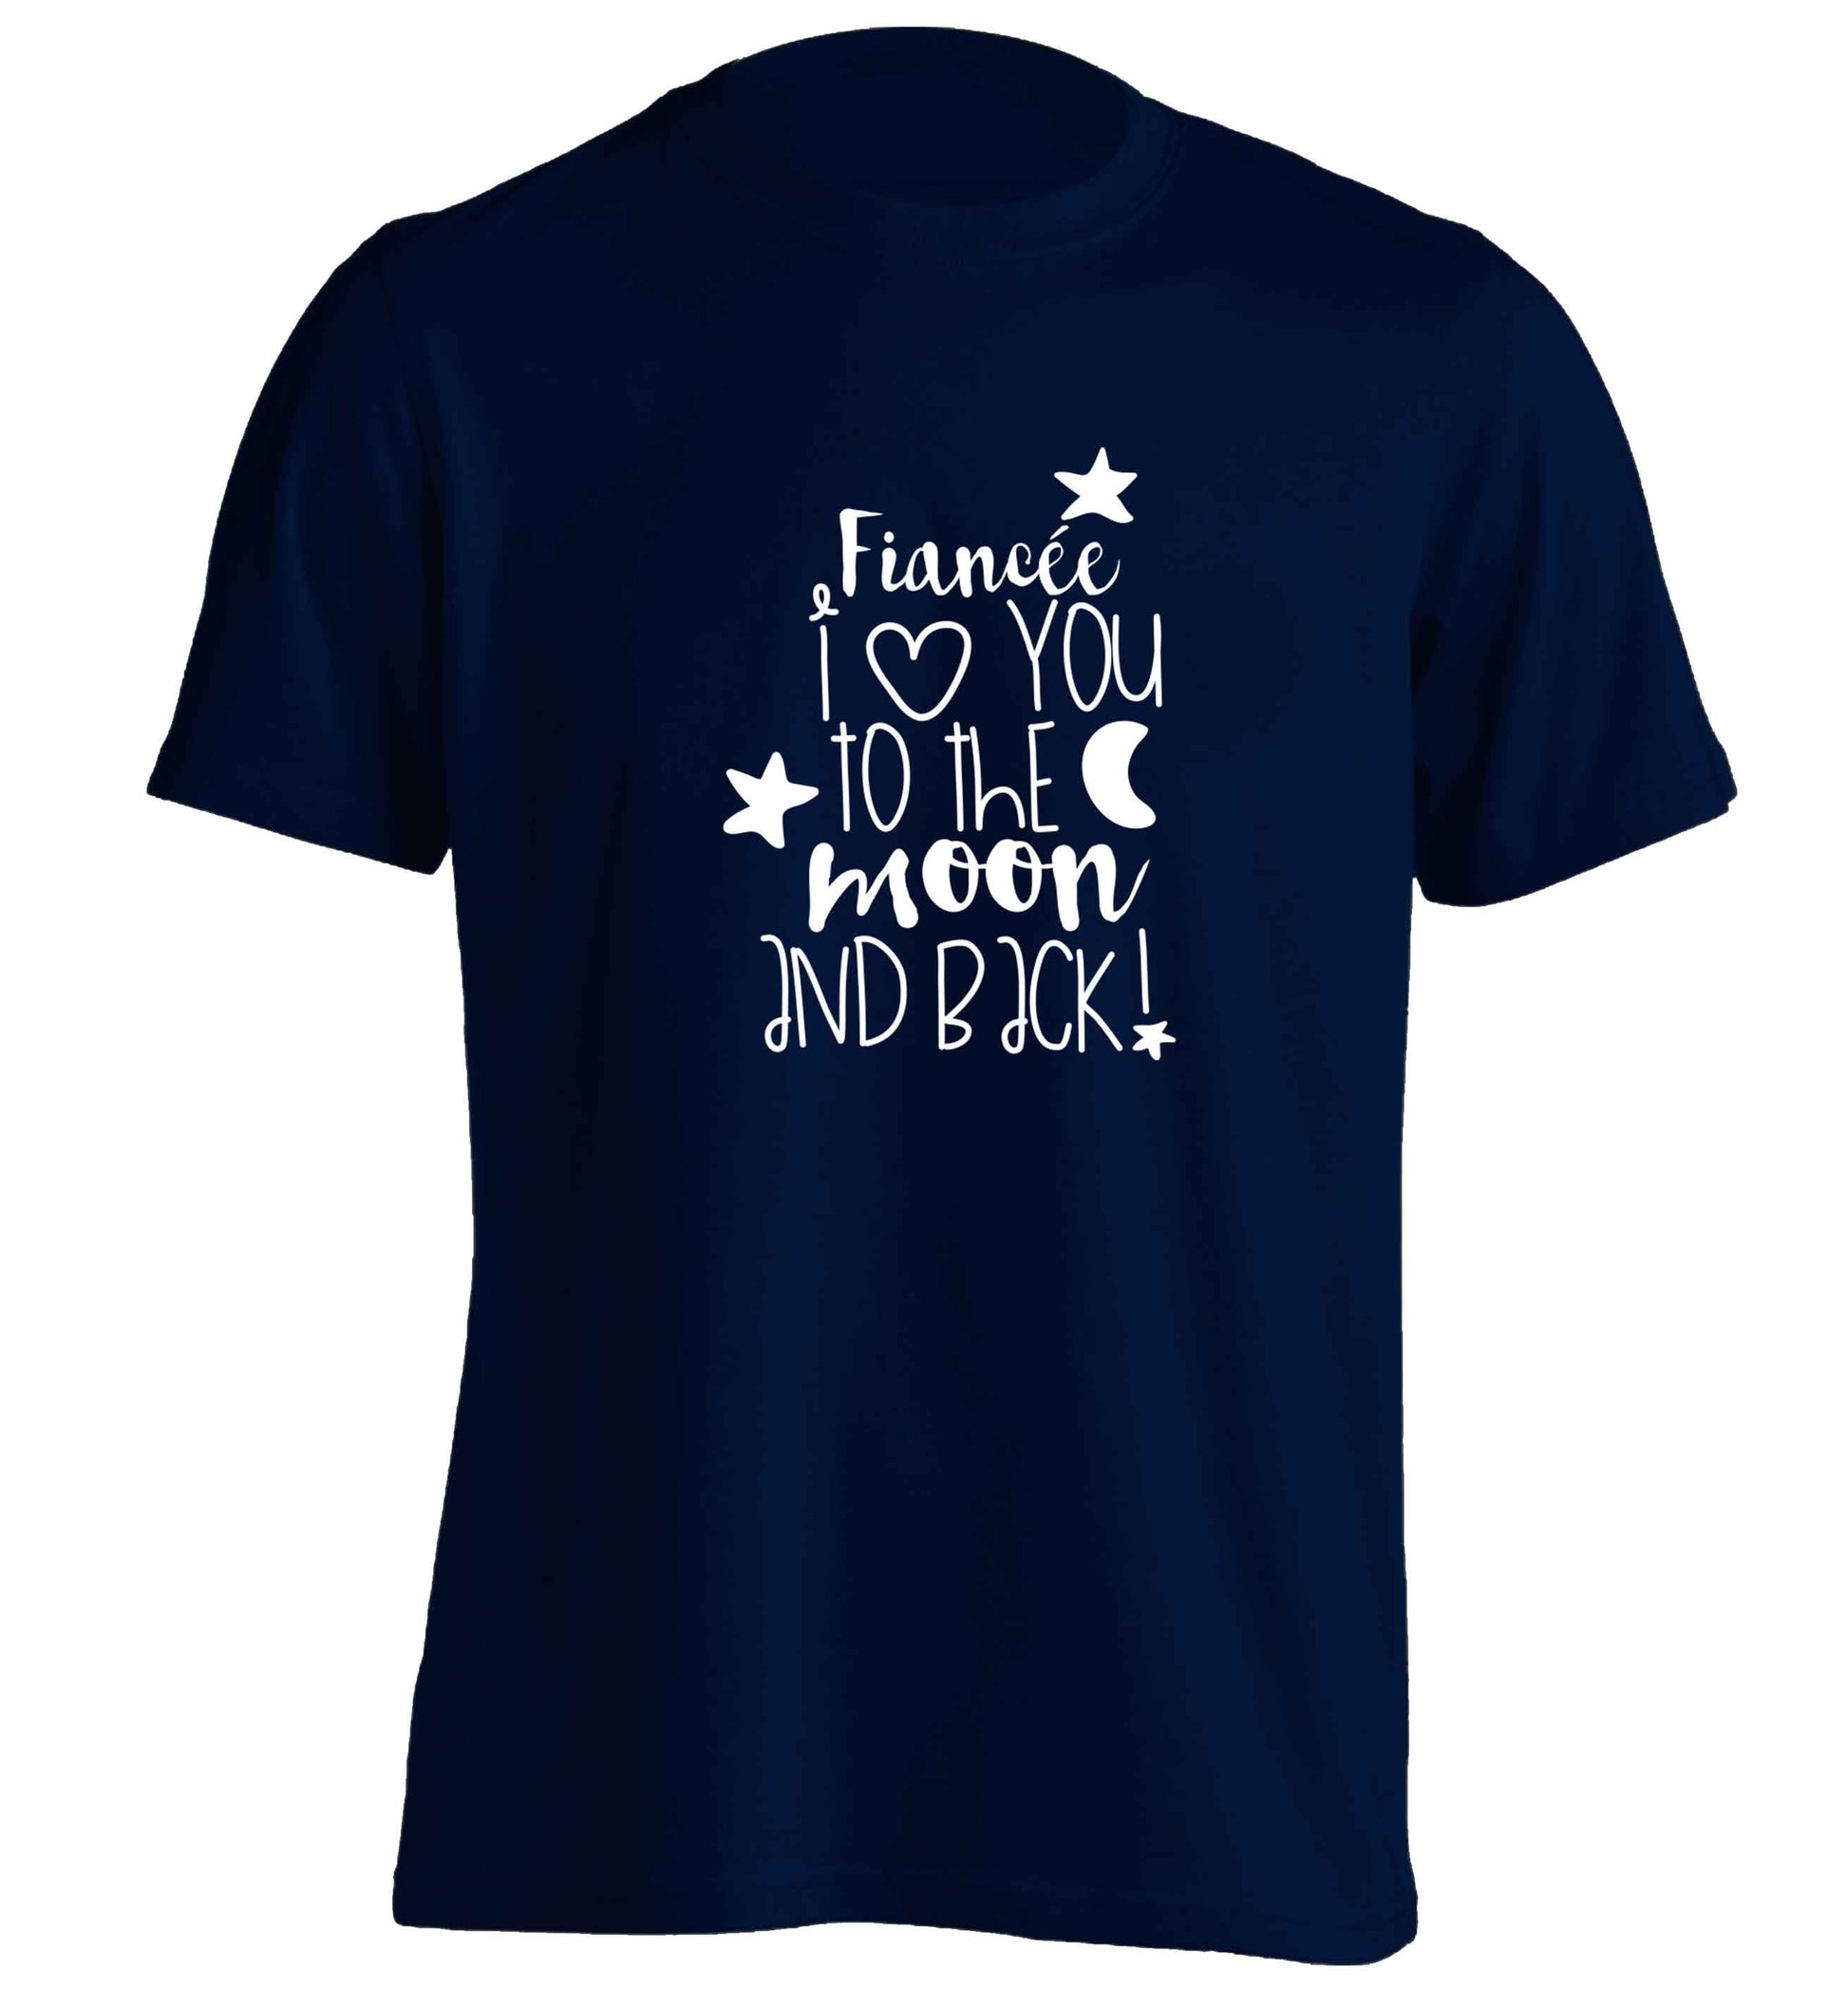 Fianc√©e I love you to the moon and back adults unisex navy Tshirt 2XL